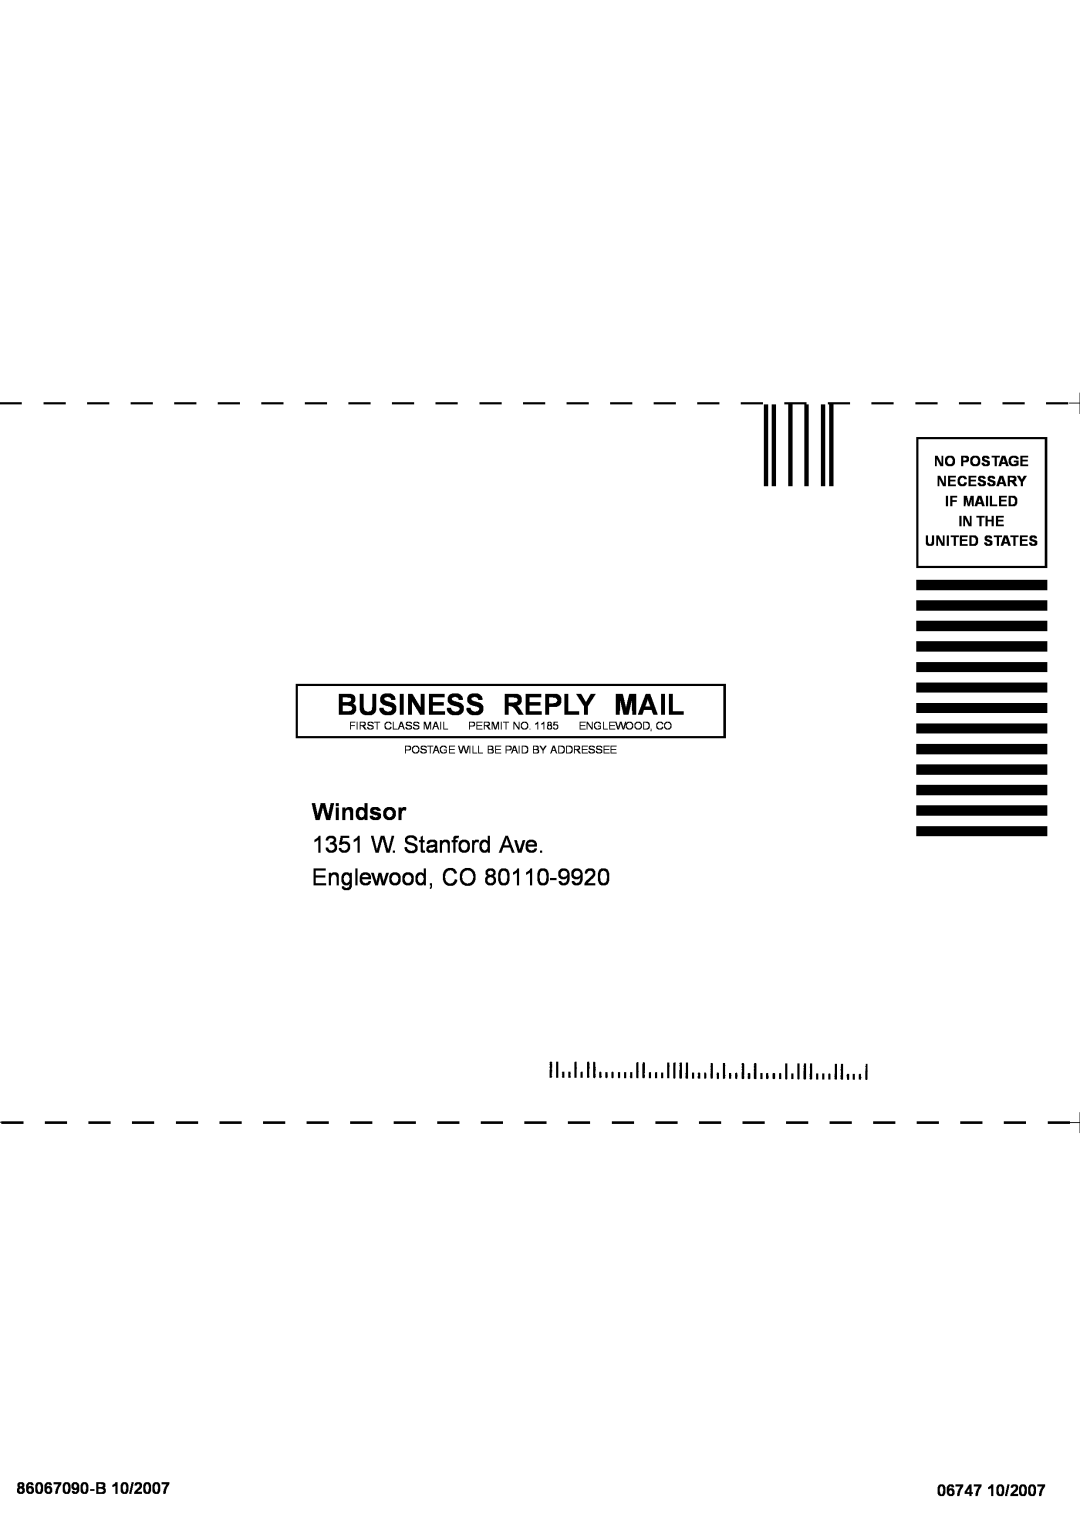 Windsor SRS12 manual Business Reply Mail, Windsor, 1351 W. Stanford Ave Englewood, CO, 86067090-B10/2007, 06747 10/2007 